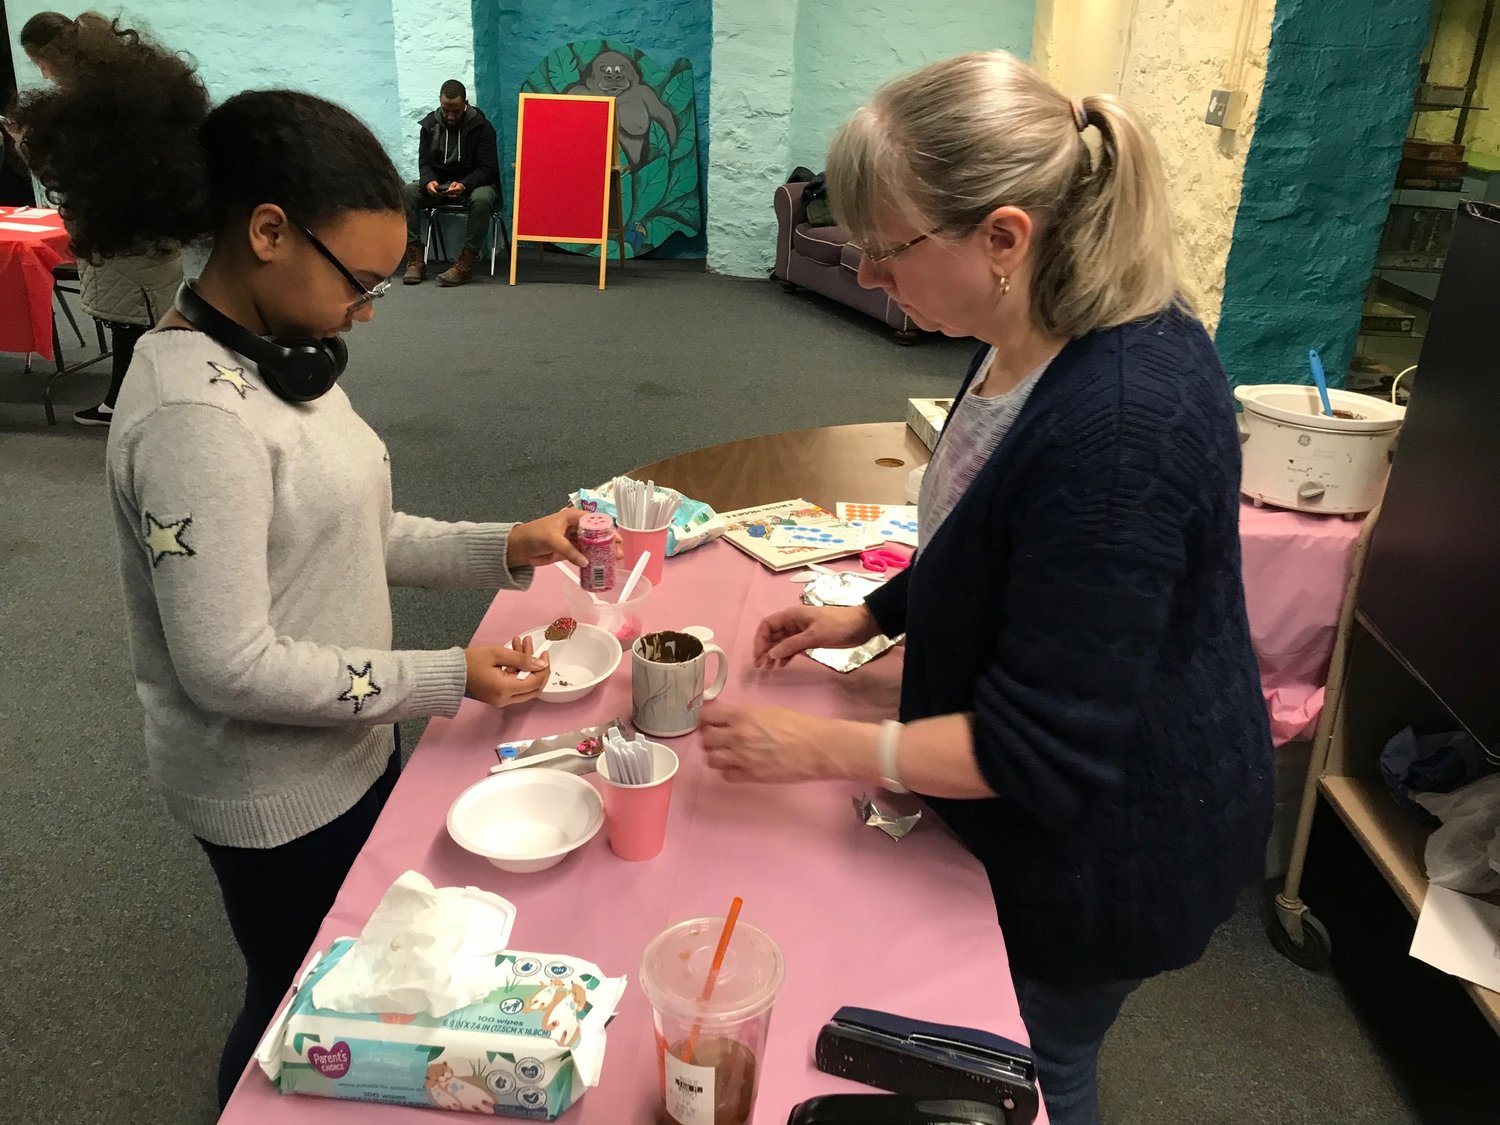 Jayla Wiggins, left, coats a plastic spoon with chocolate and sprinkles while Lisa Renz supervises Saturday, Feb. 11 during a special Valentine's Day children's program at the Utica Public Library.